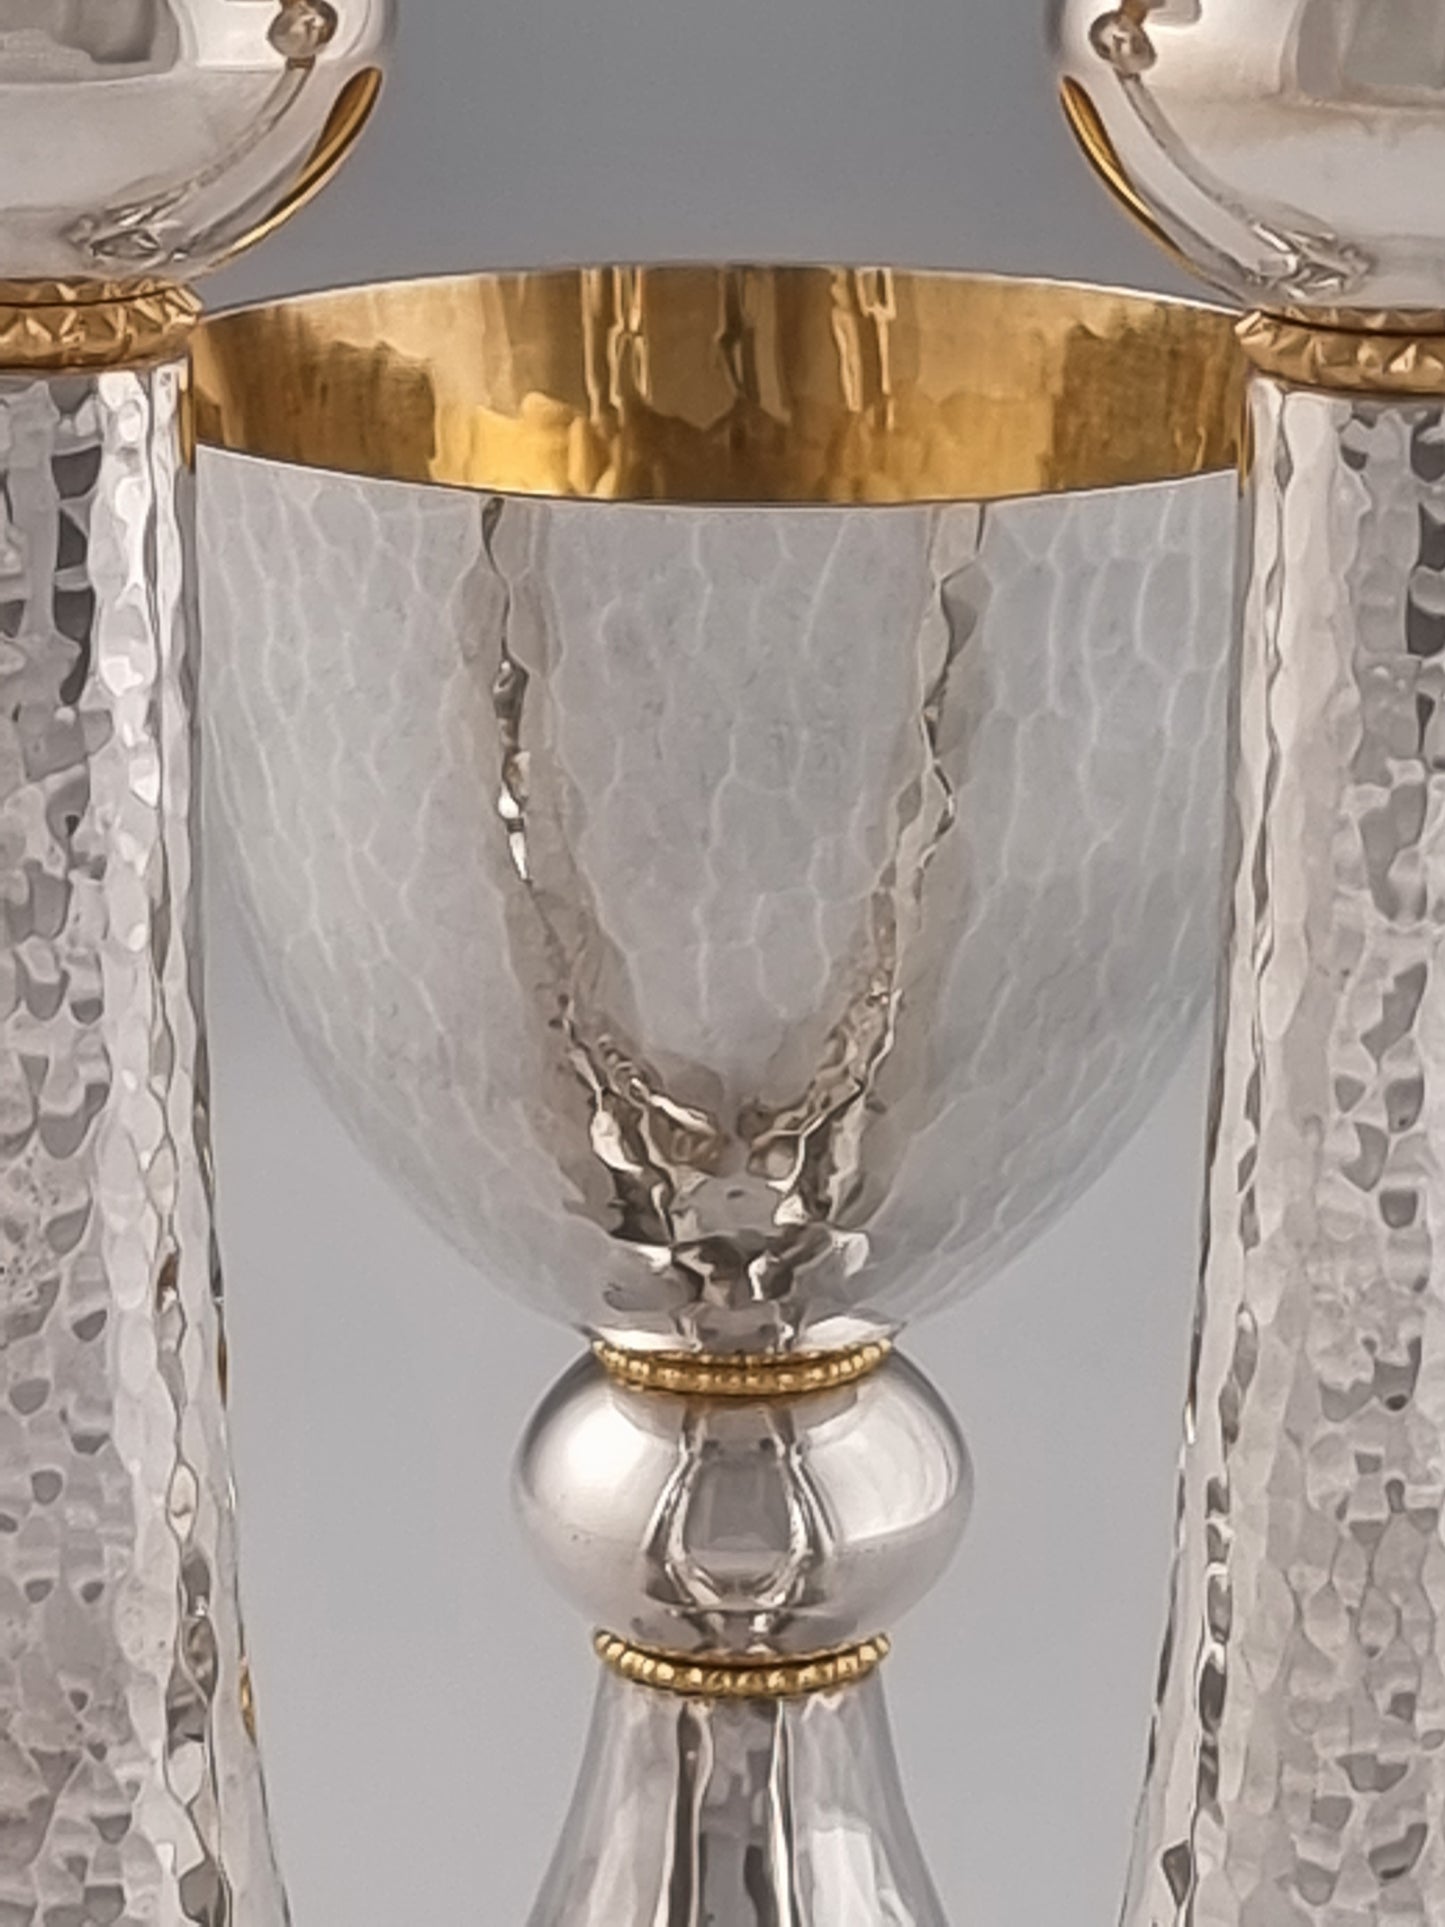 Jeremiah Kiddush Set. This set was designed in 1993. It is made of sterling silver and gold-plated silver. The cup is 5” high and the candlesticks are 7½“ high.